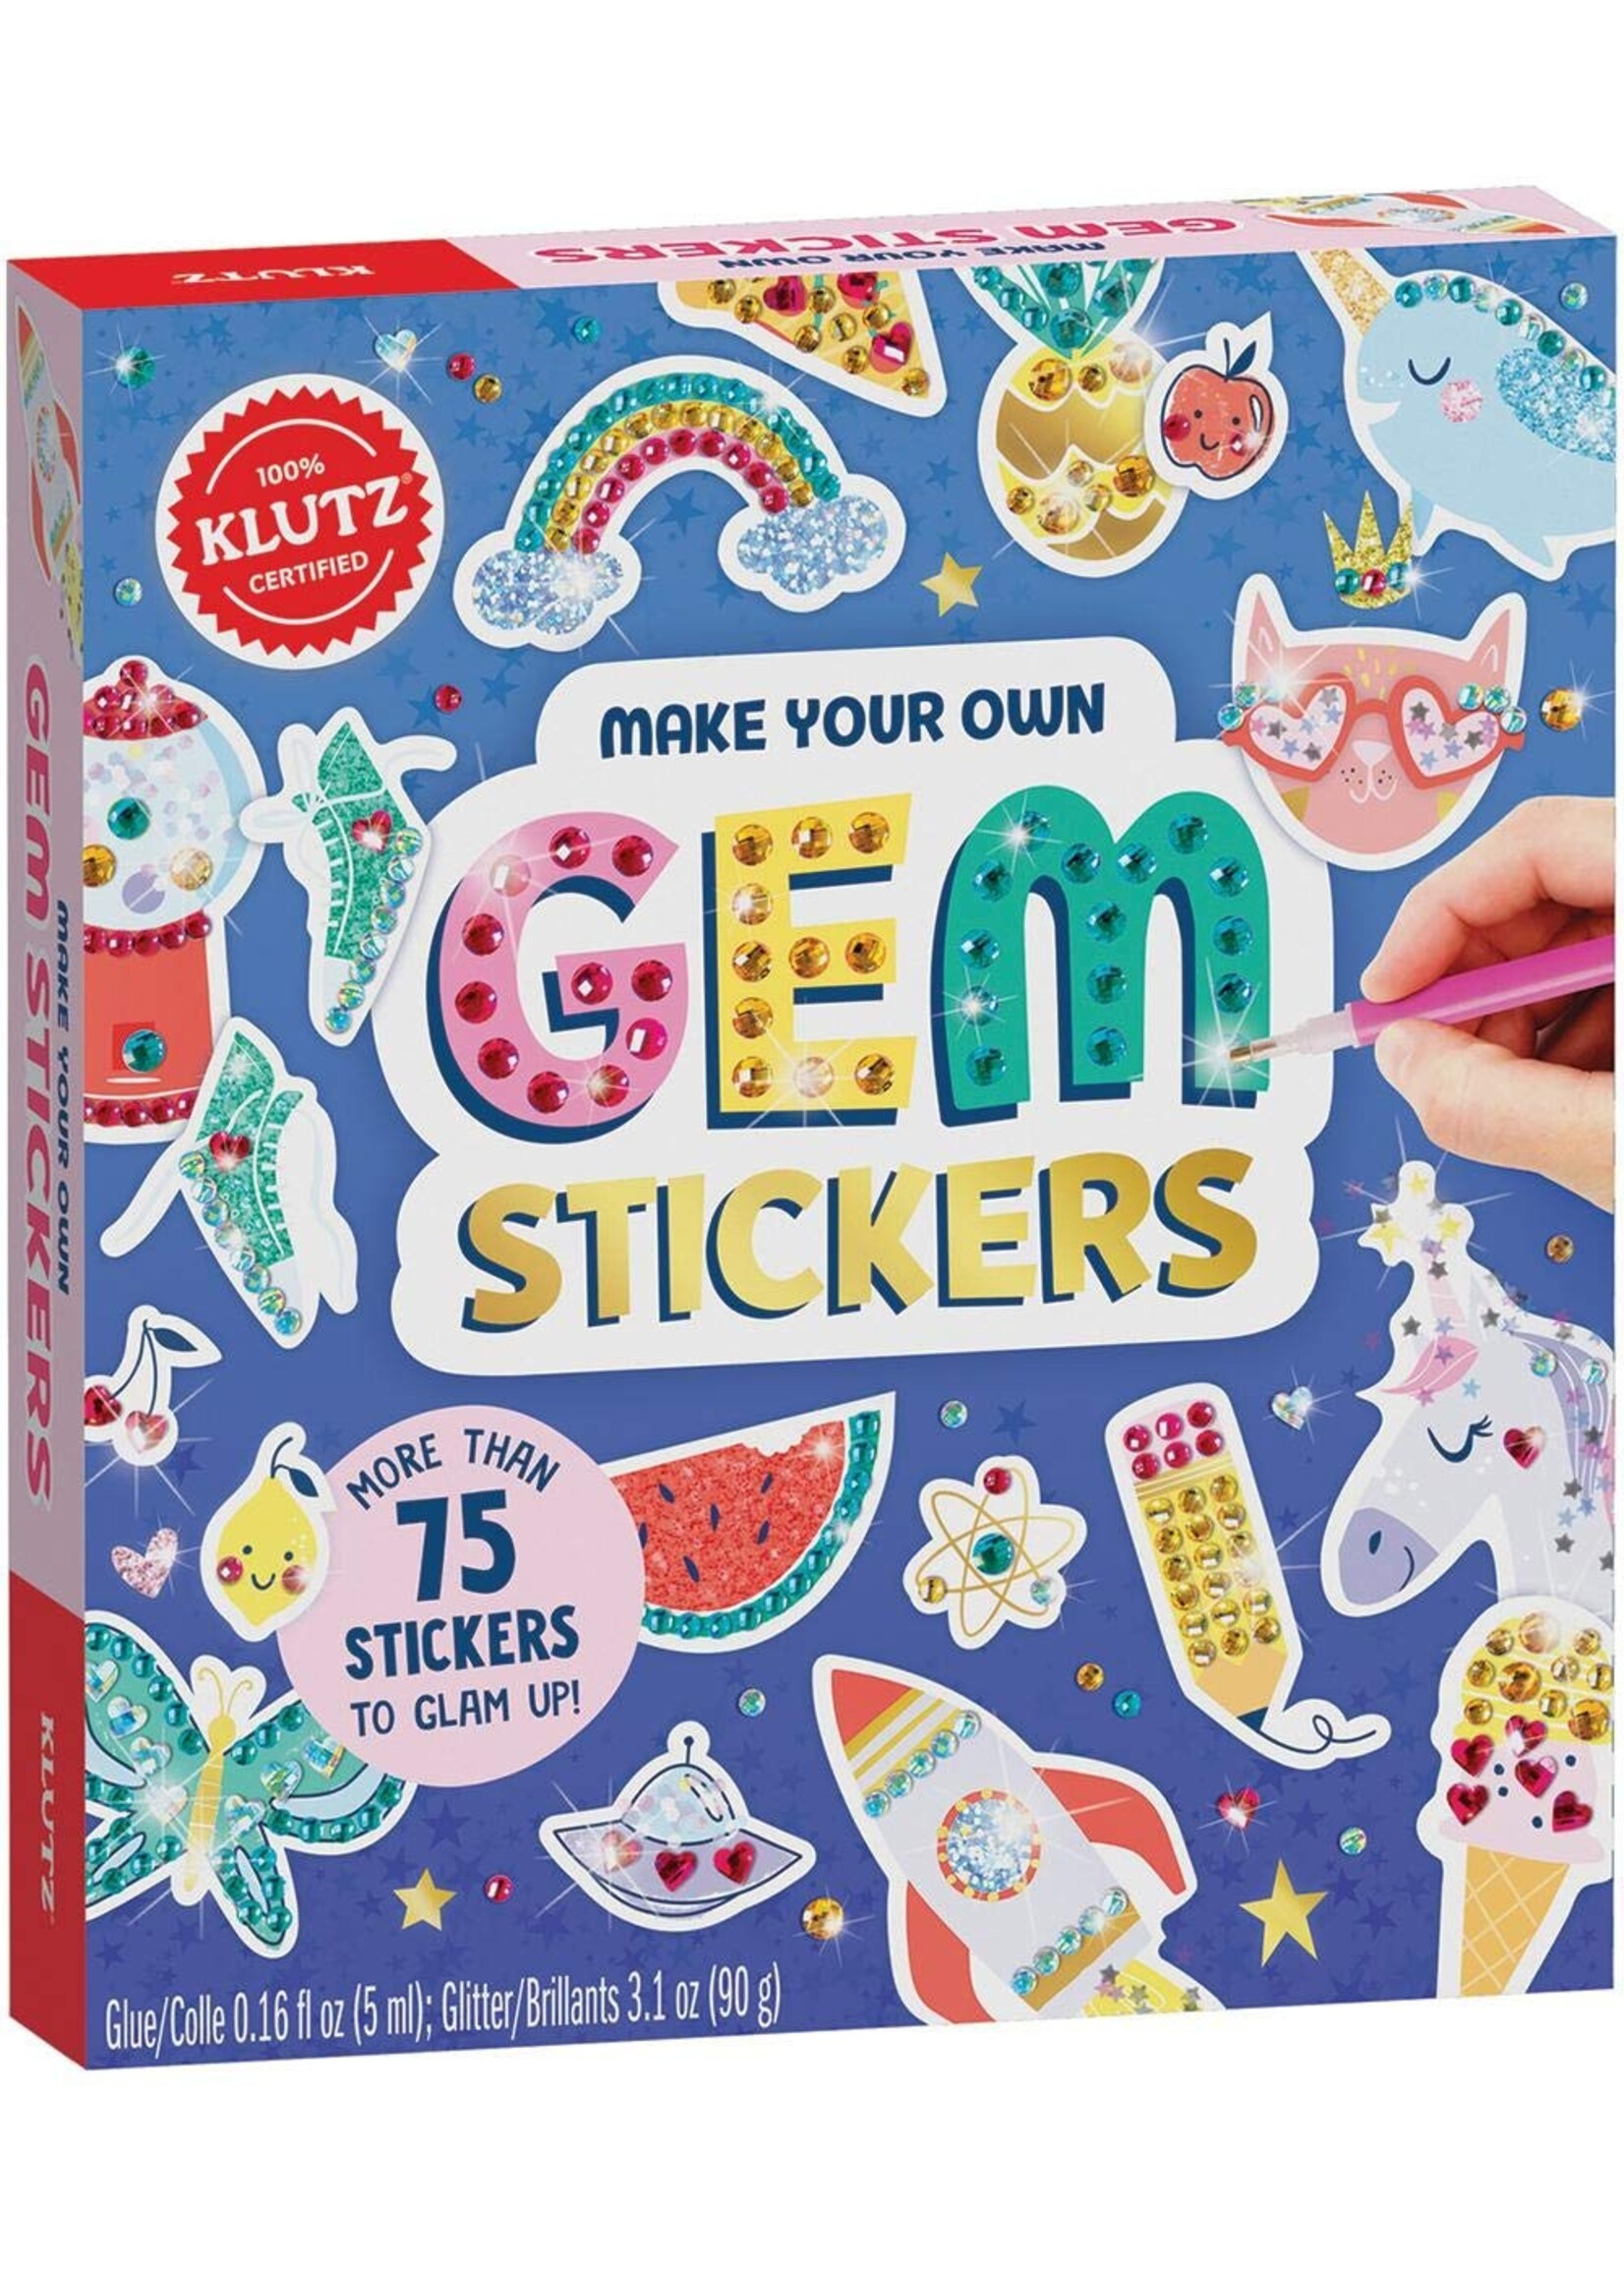 MAKE YOUR OWN GEM STICKERS